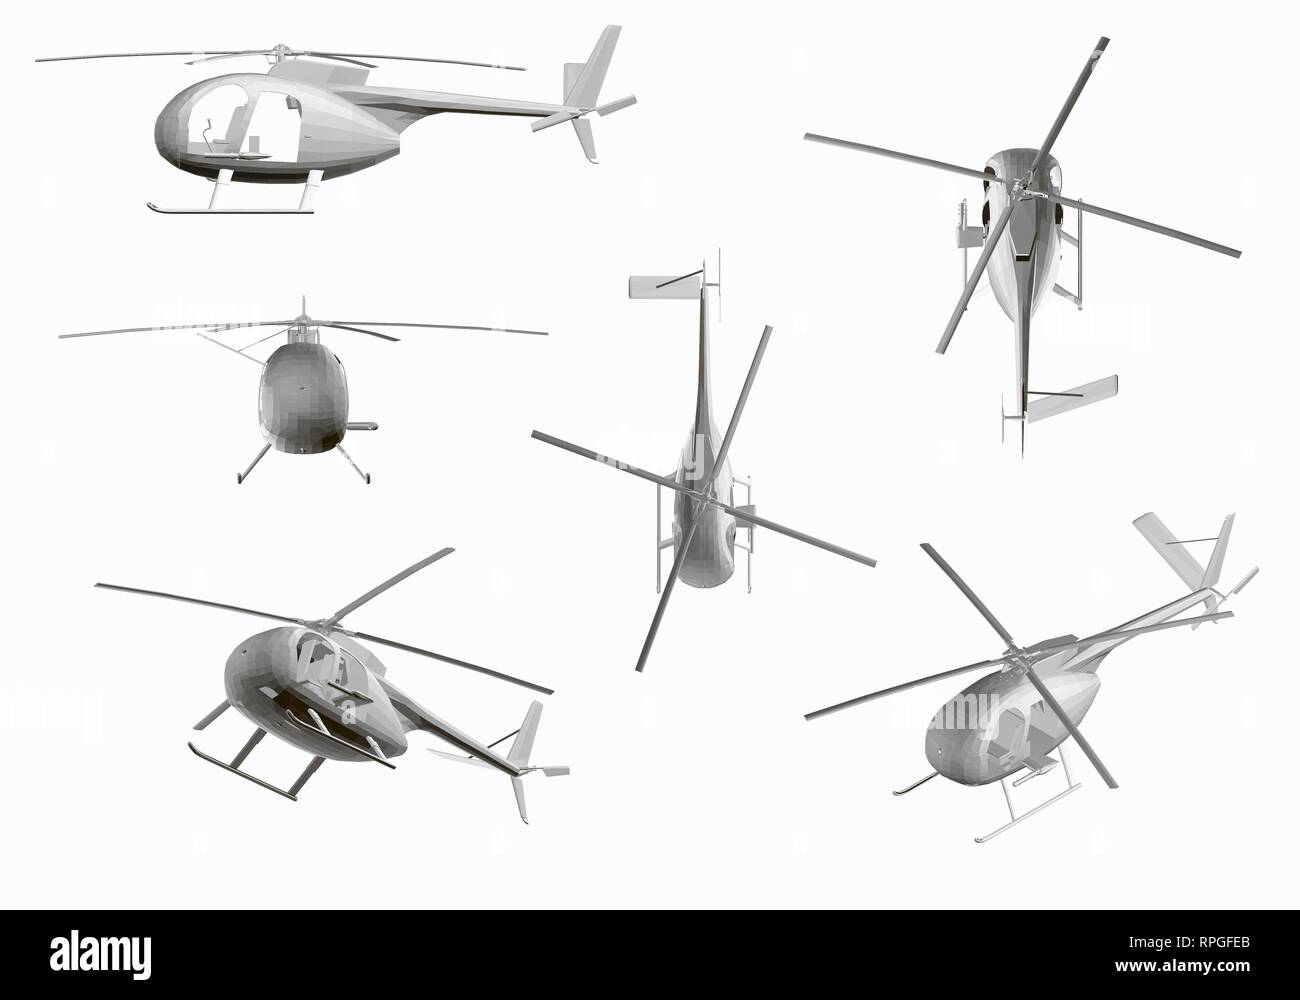 Download Set Of Corporate Helicopter Vector Template Isolated On White Background Gray Helicopter Mockup Template For Branding Identity Design Gray Eurocopter Stock Vector Image Art Alamy